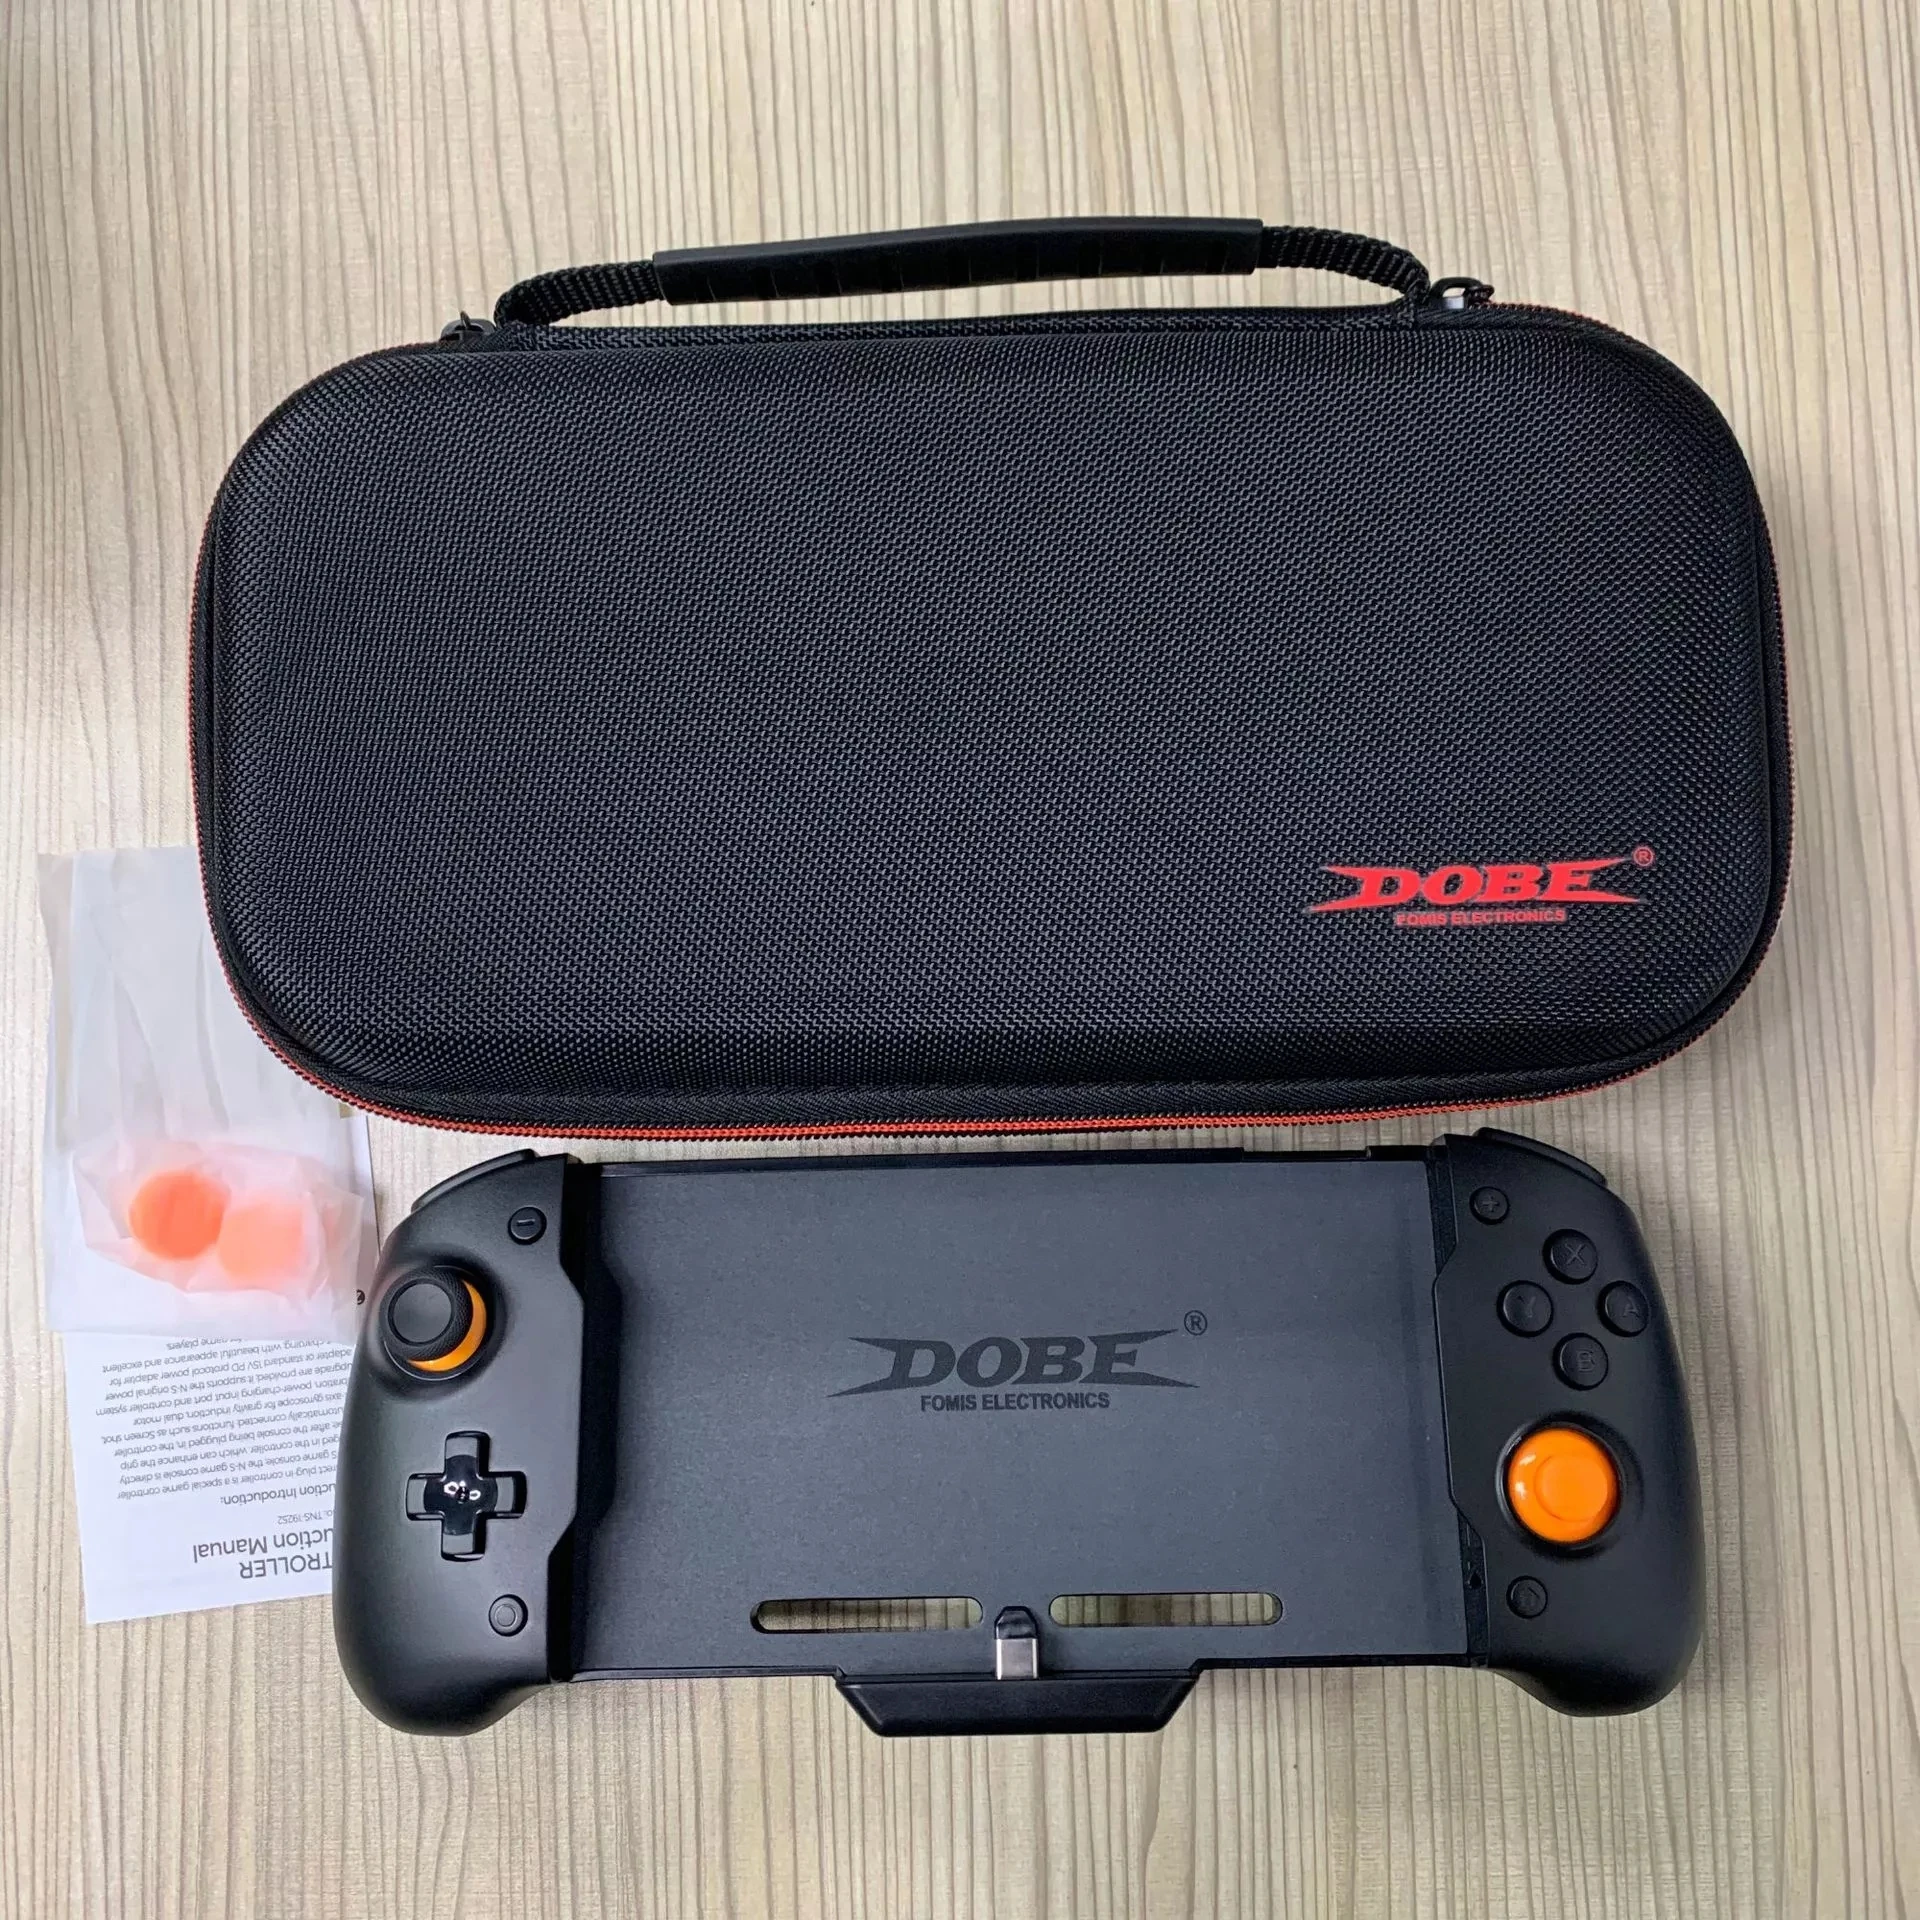 

Direct Dock Dual Vibration 6 Axis Gyro Fast Charge Handheld Hand Grip Shell Case Game Controller & EVA Bag for NS Switch Console